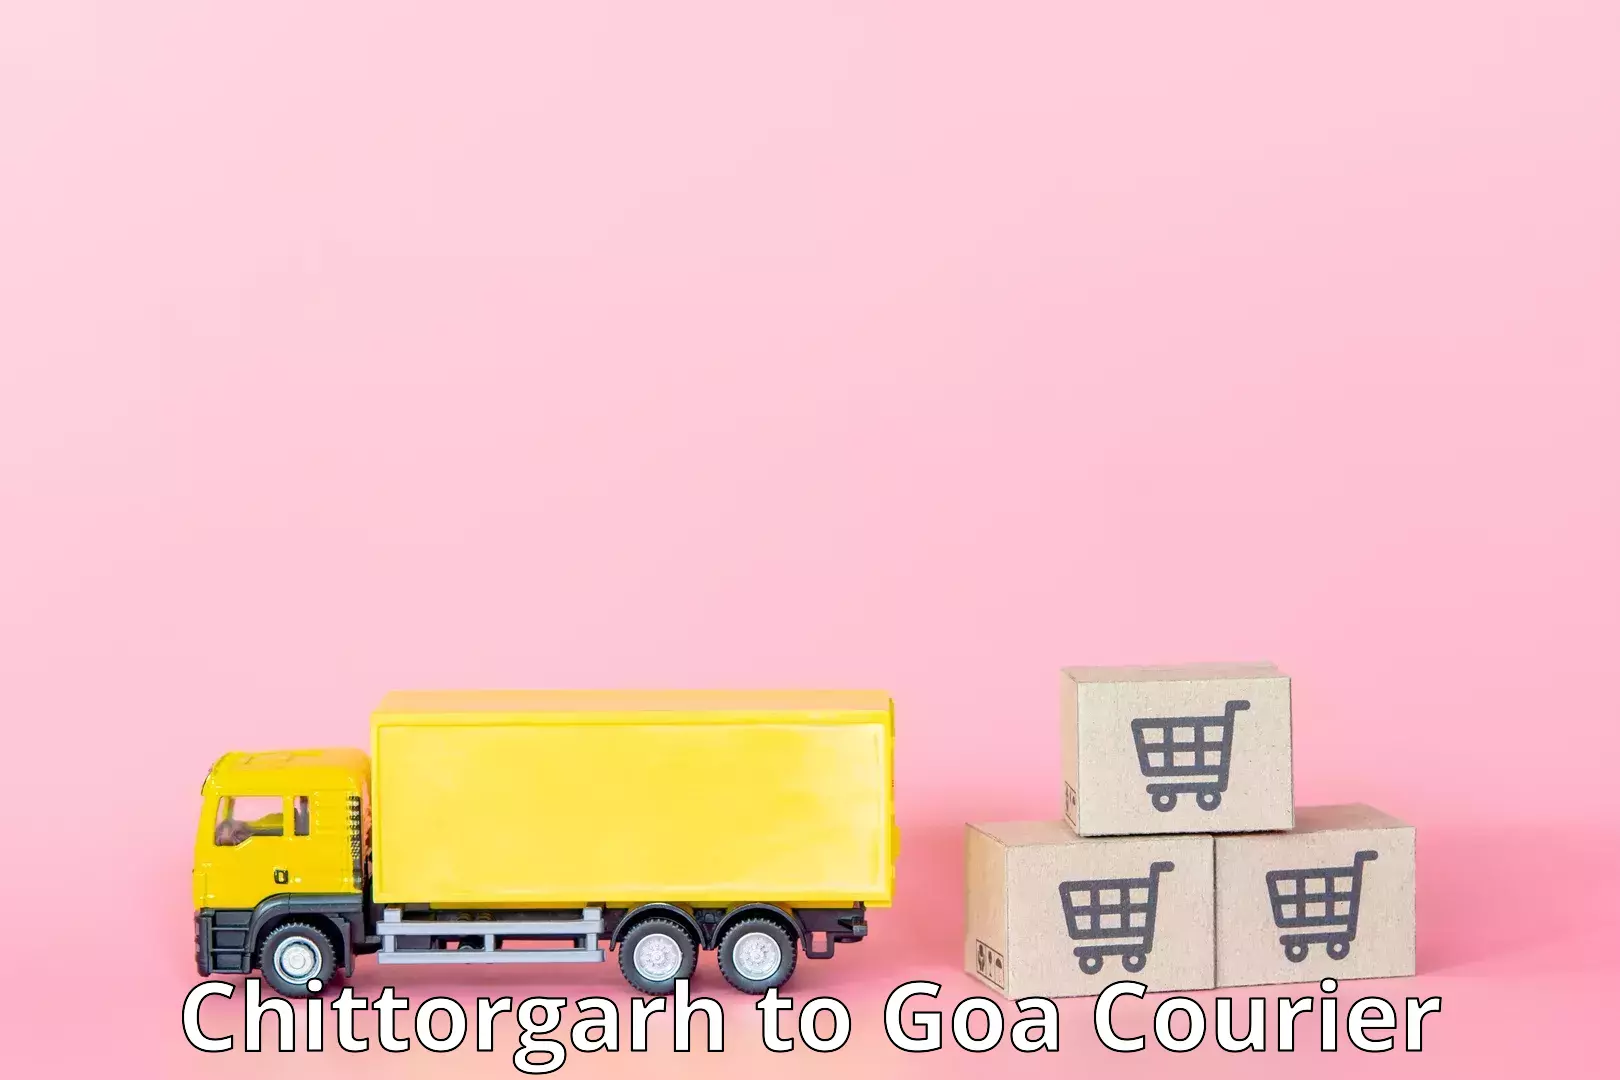 Multi-national courier services Chittorgarh to IIT Goa